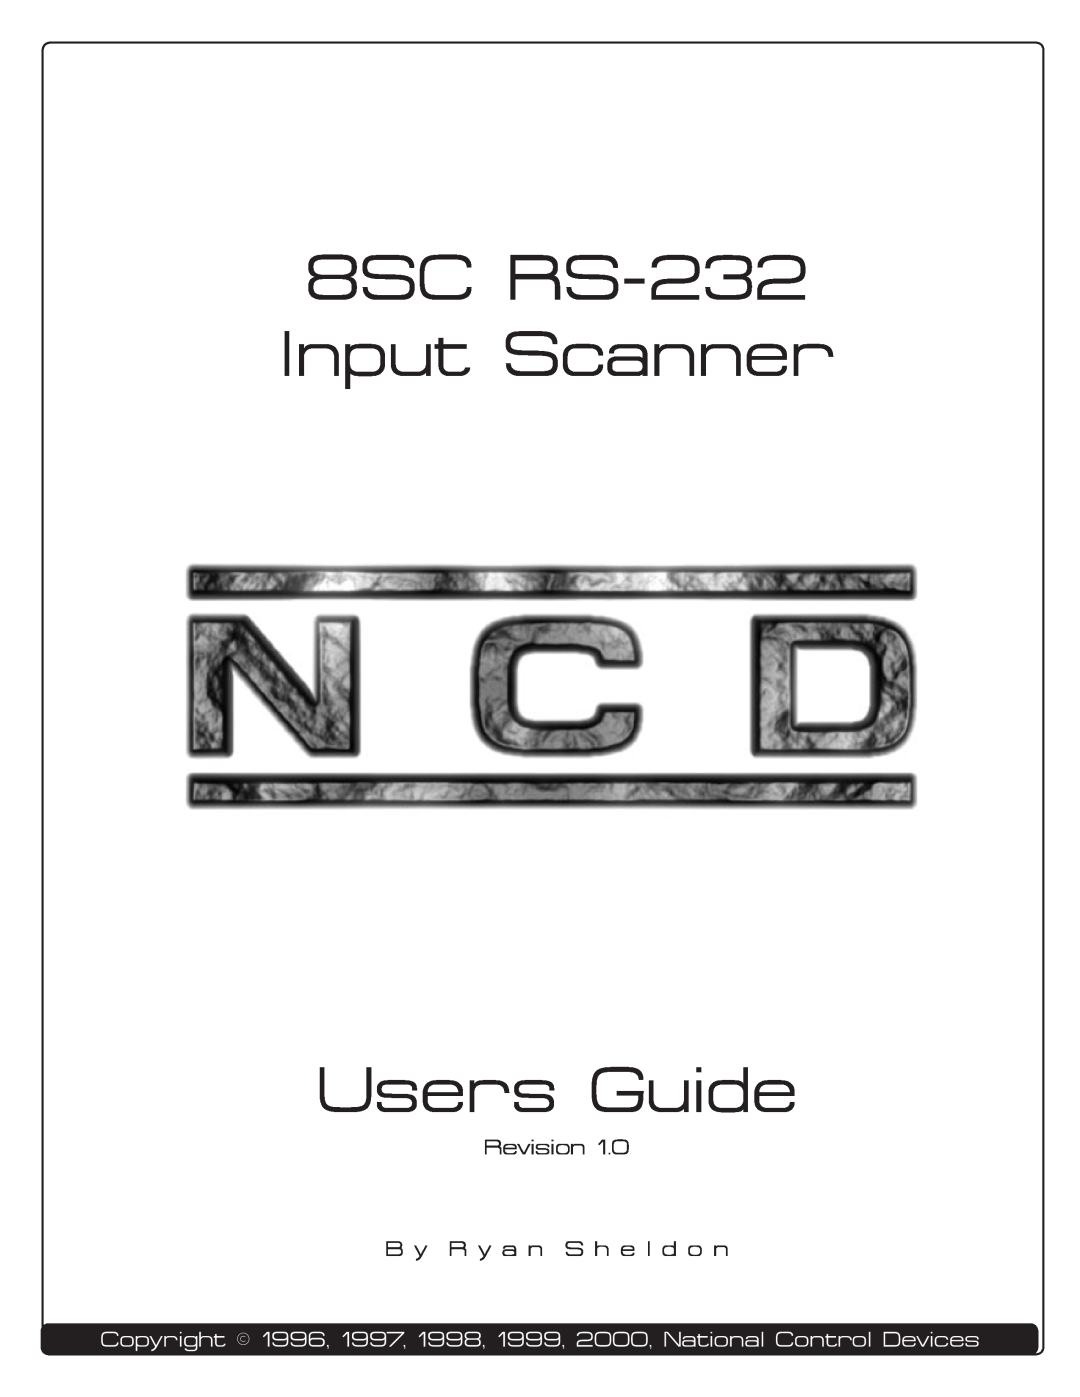 IBM manual 8SC RS-232 Input Scanner Users Guide, Revision B y R y a n S h e l d o n 